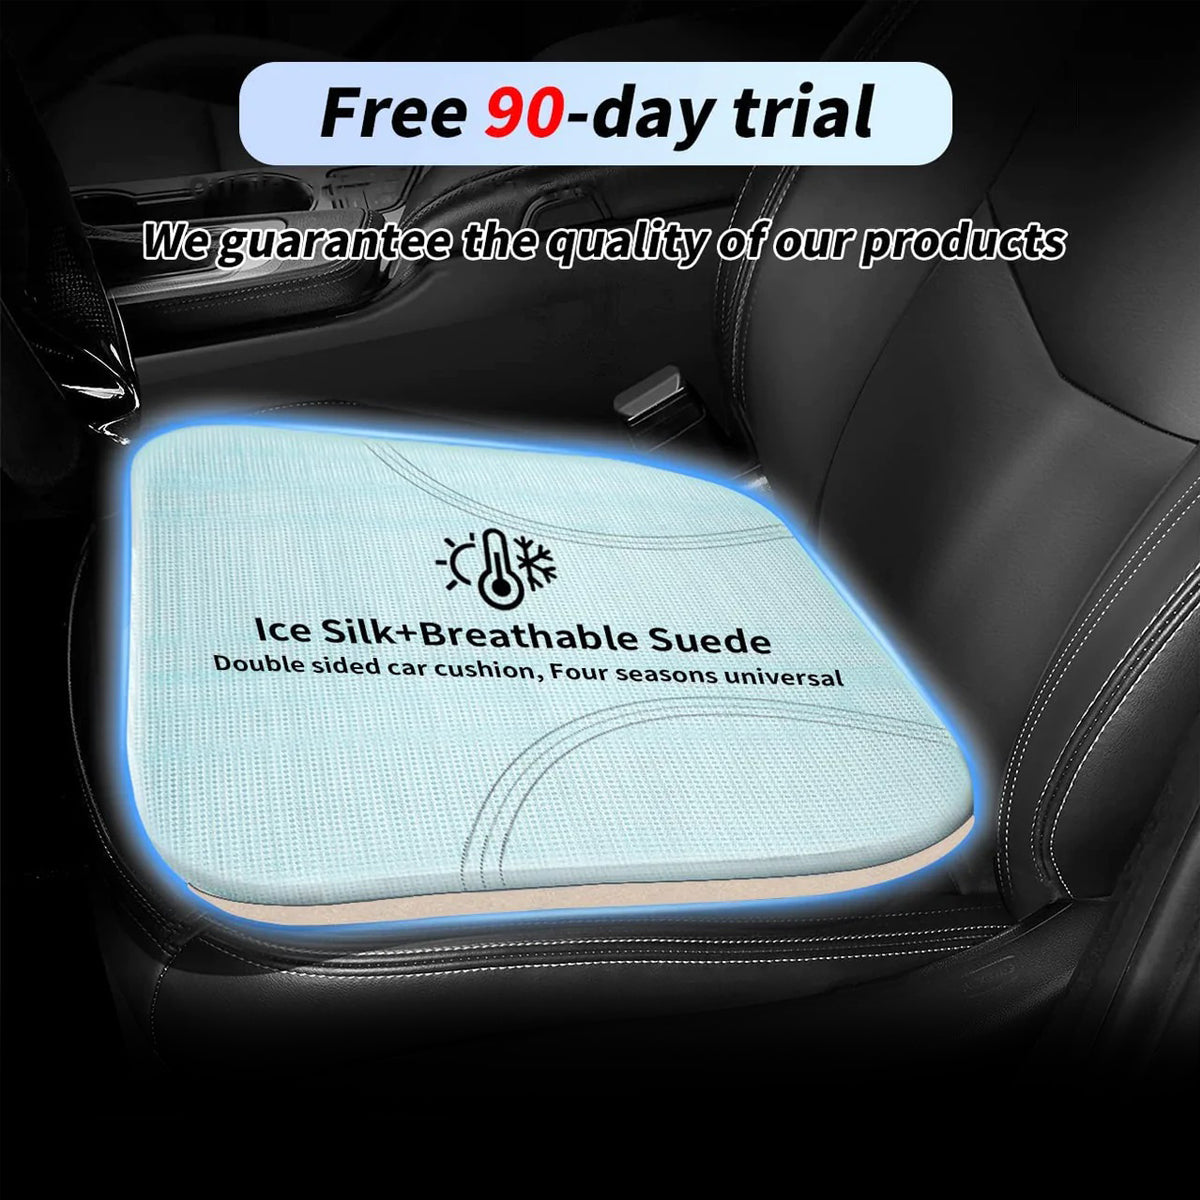 Car Seat Cushion, Custom For Cars, Car Memory Foam Seat Cushion, Heightening Seat Cushion, Seat Cushion for Car and Office Chair MS19999